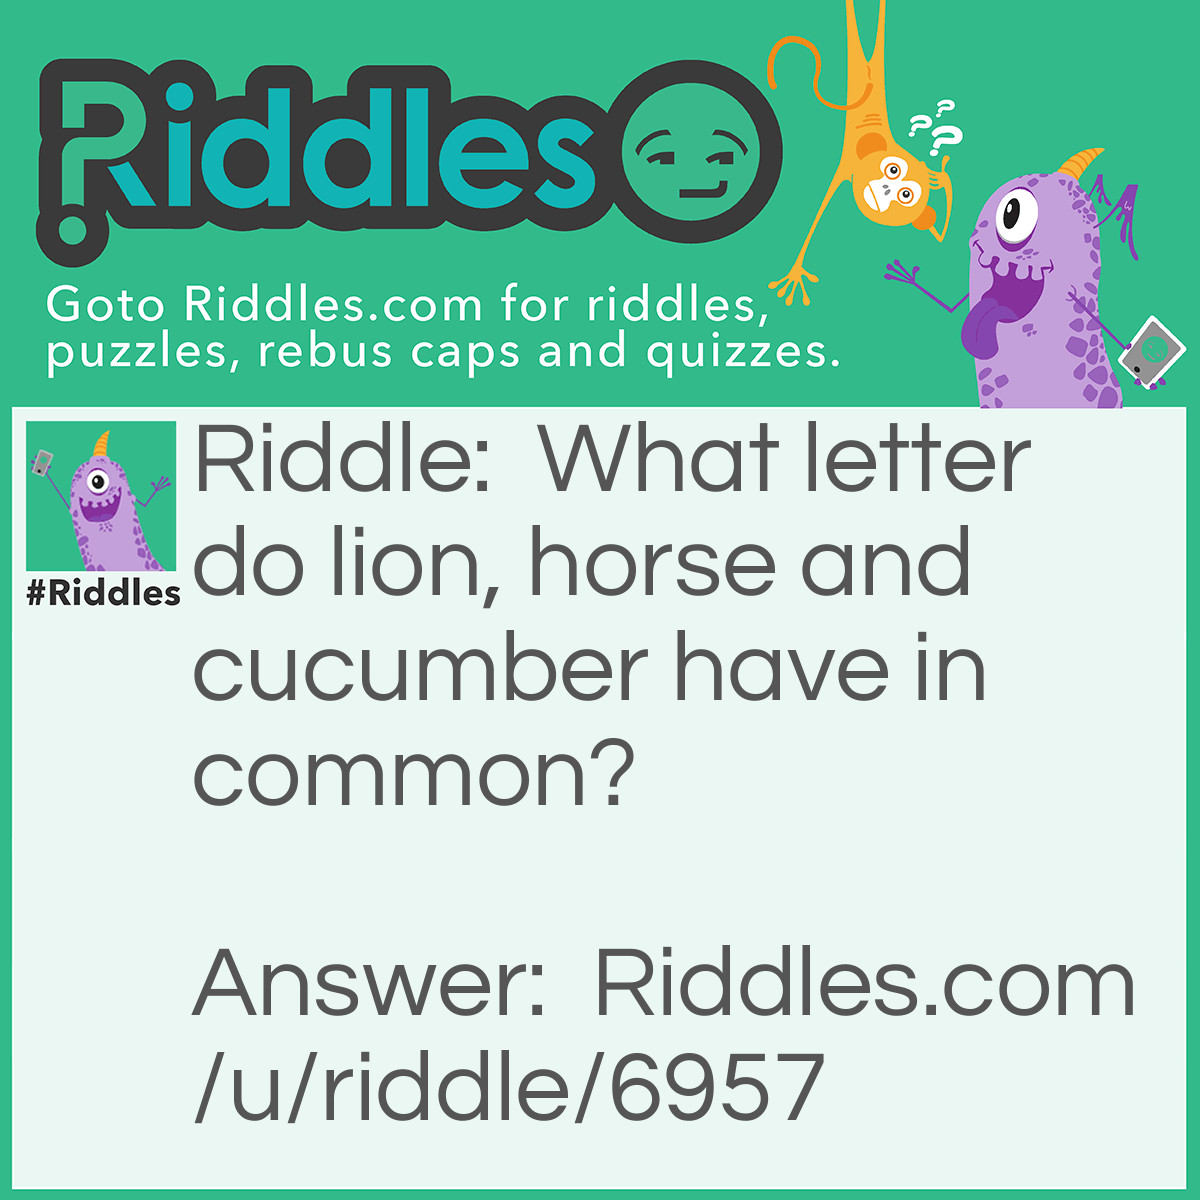 Riddle: What letter do lion, horse and cucumber have in common? Answer: They are all missing the vowel A. (Lion, Horse, Cucumber)